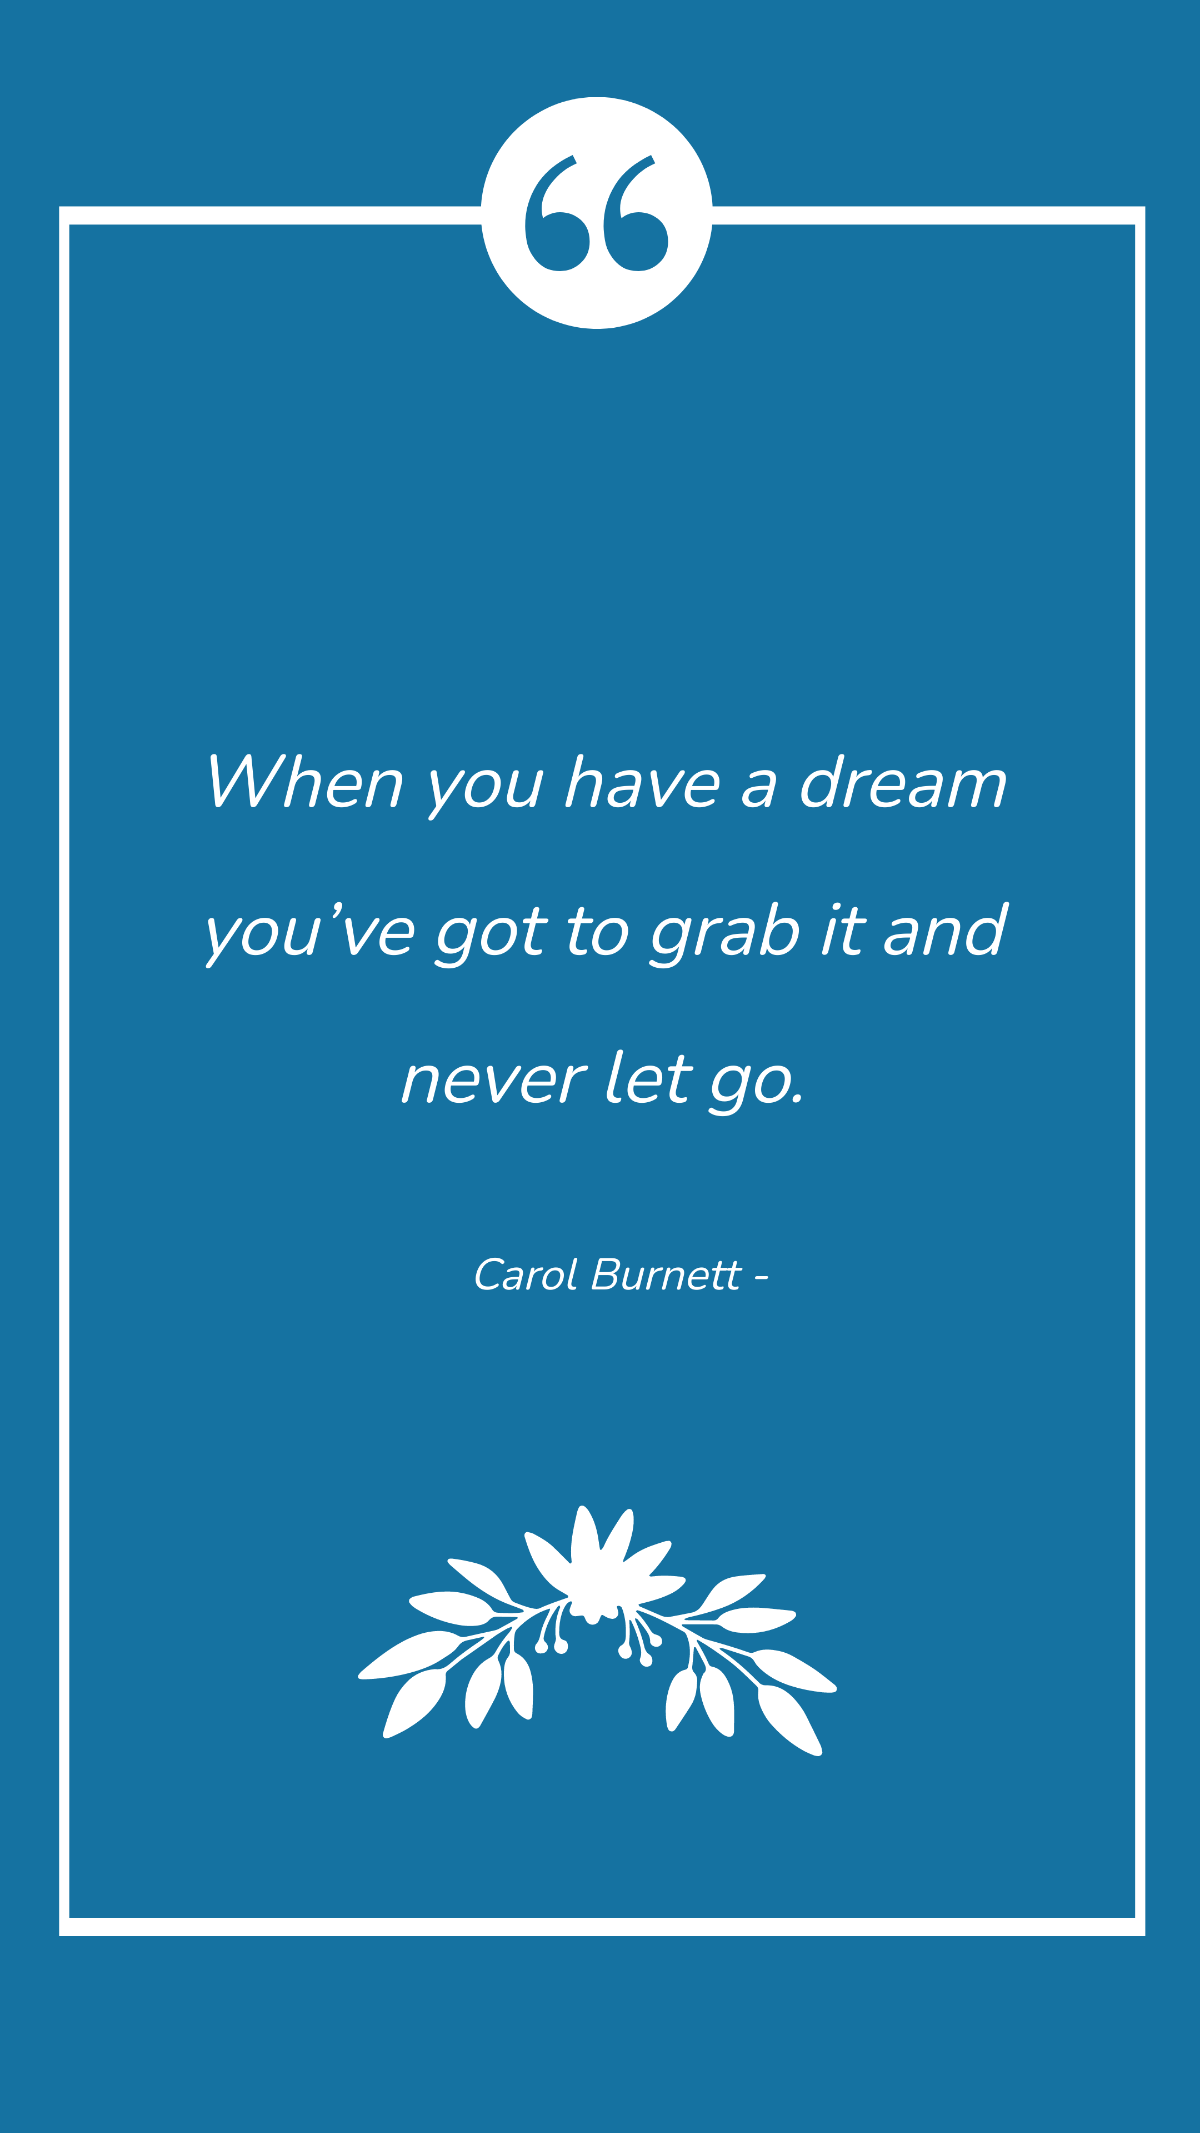 Carol Burnett - When you have a dream you’ve got to grab it and never let go.